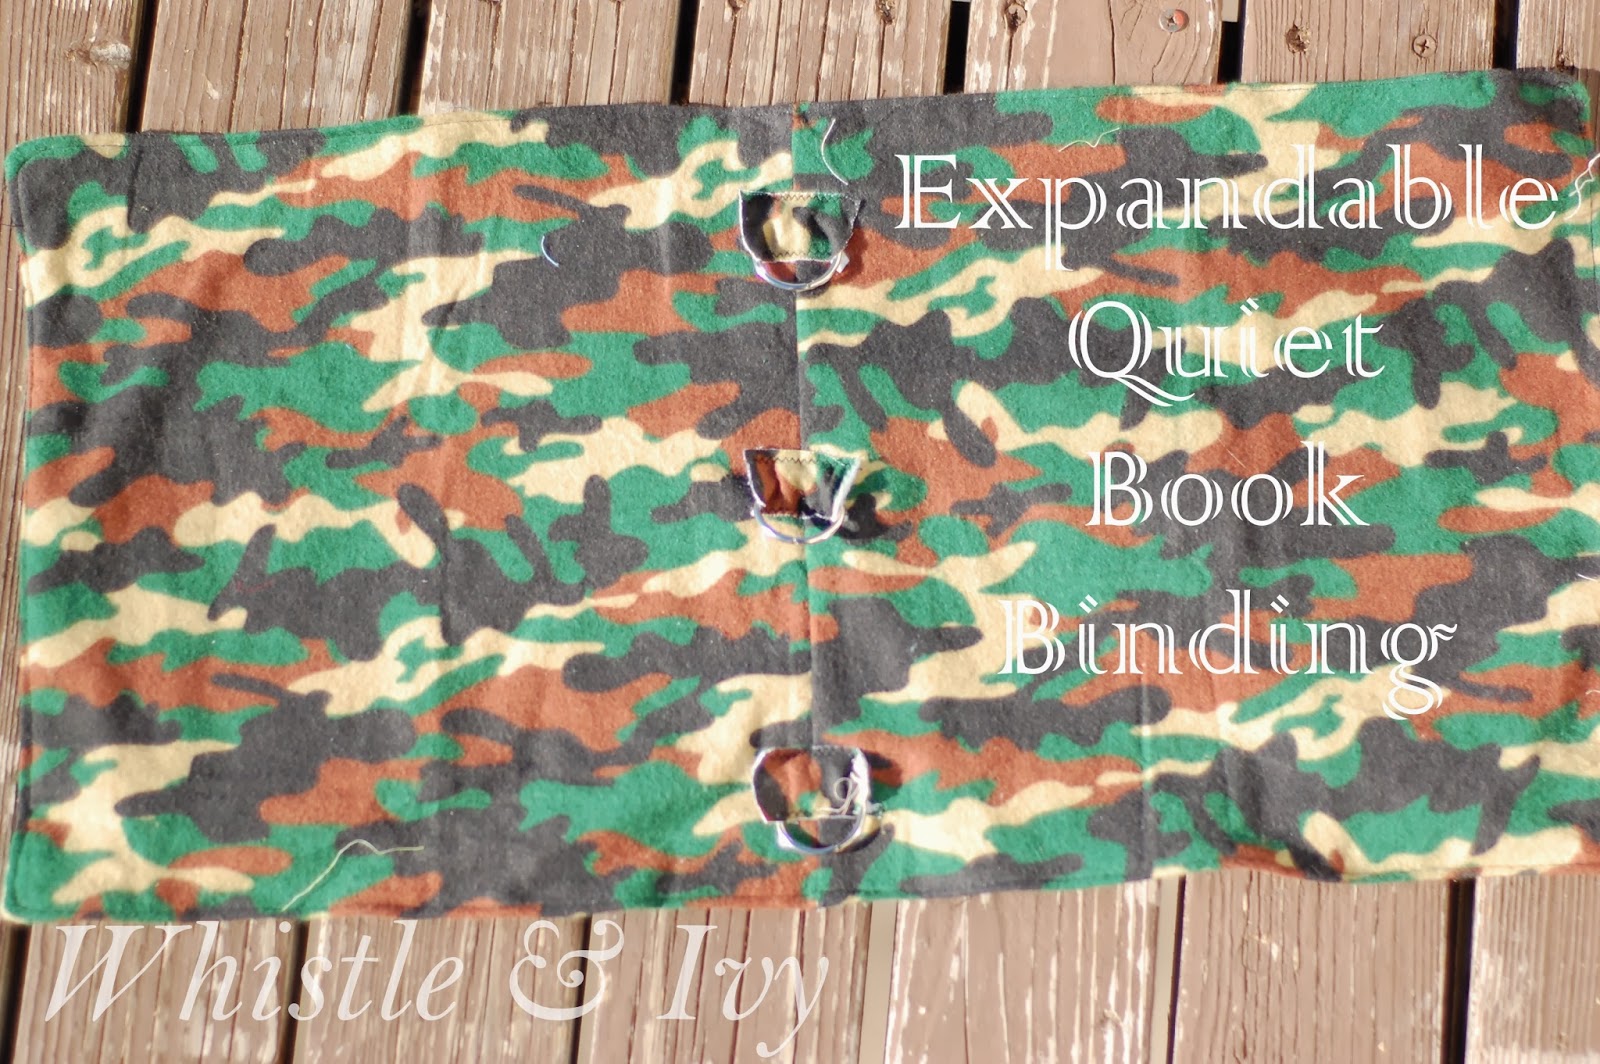 Expandable Quietbook Binding